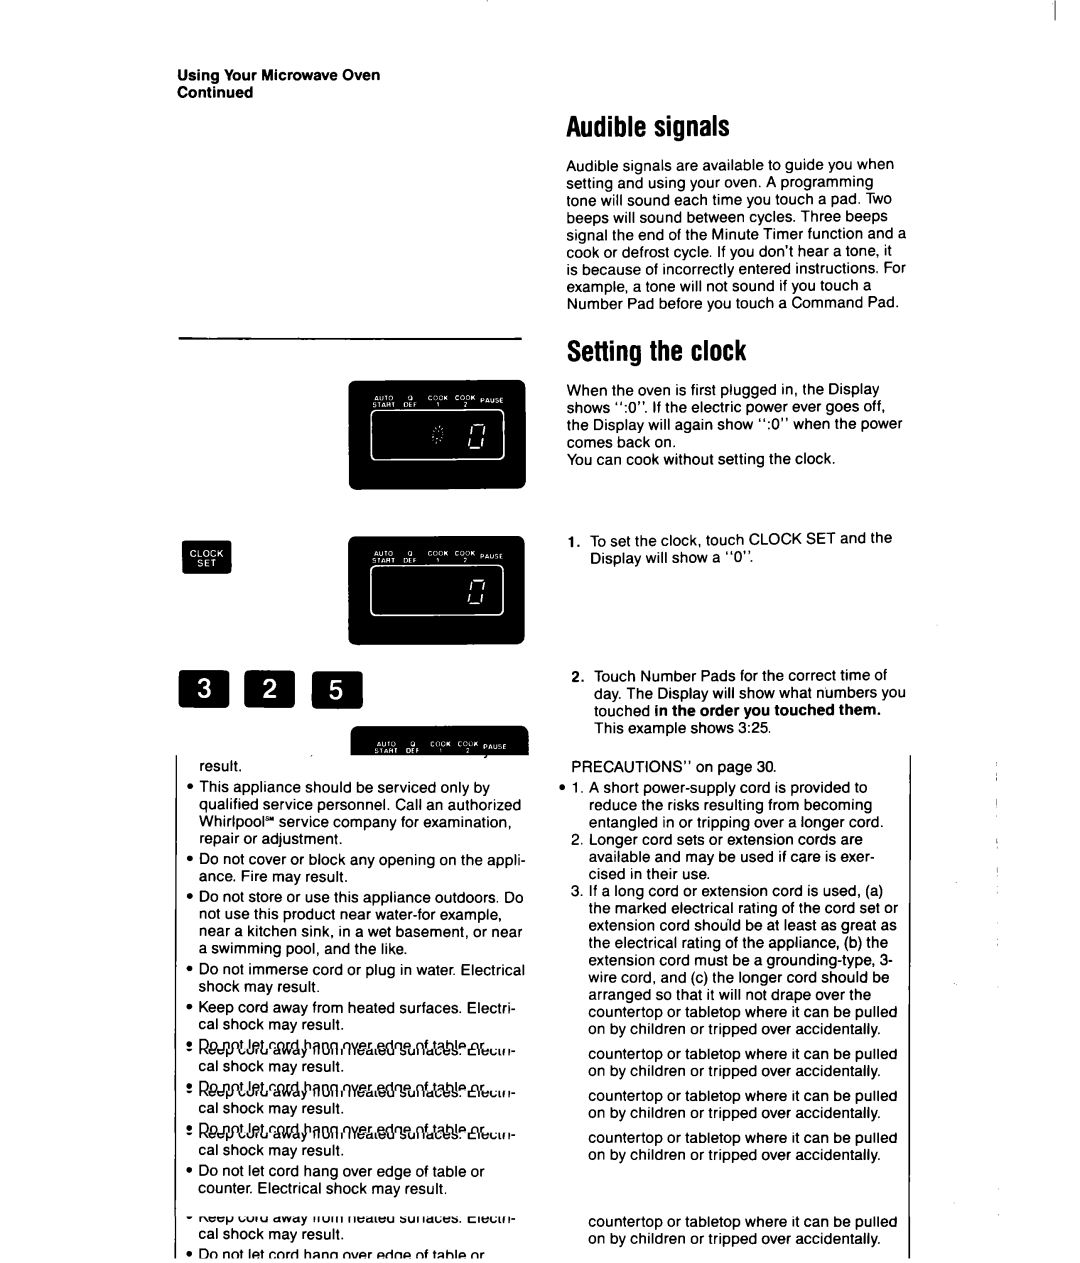 Whirlpool MSI040XY, MSI065XY user manual Audible signals, Setting the clock, Using Your Microwave Oven 